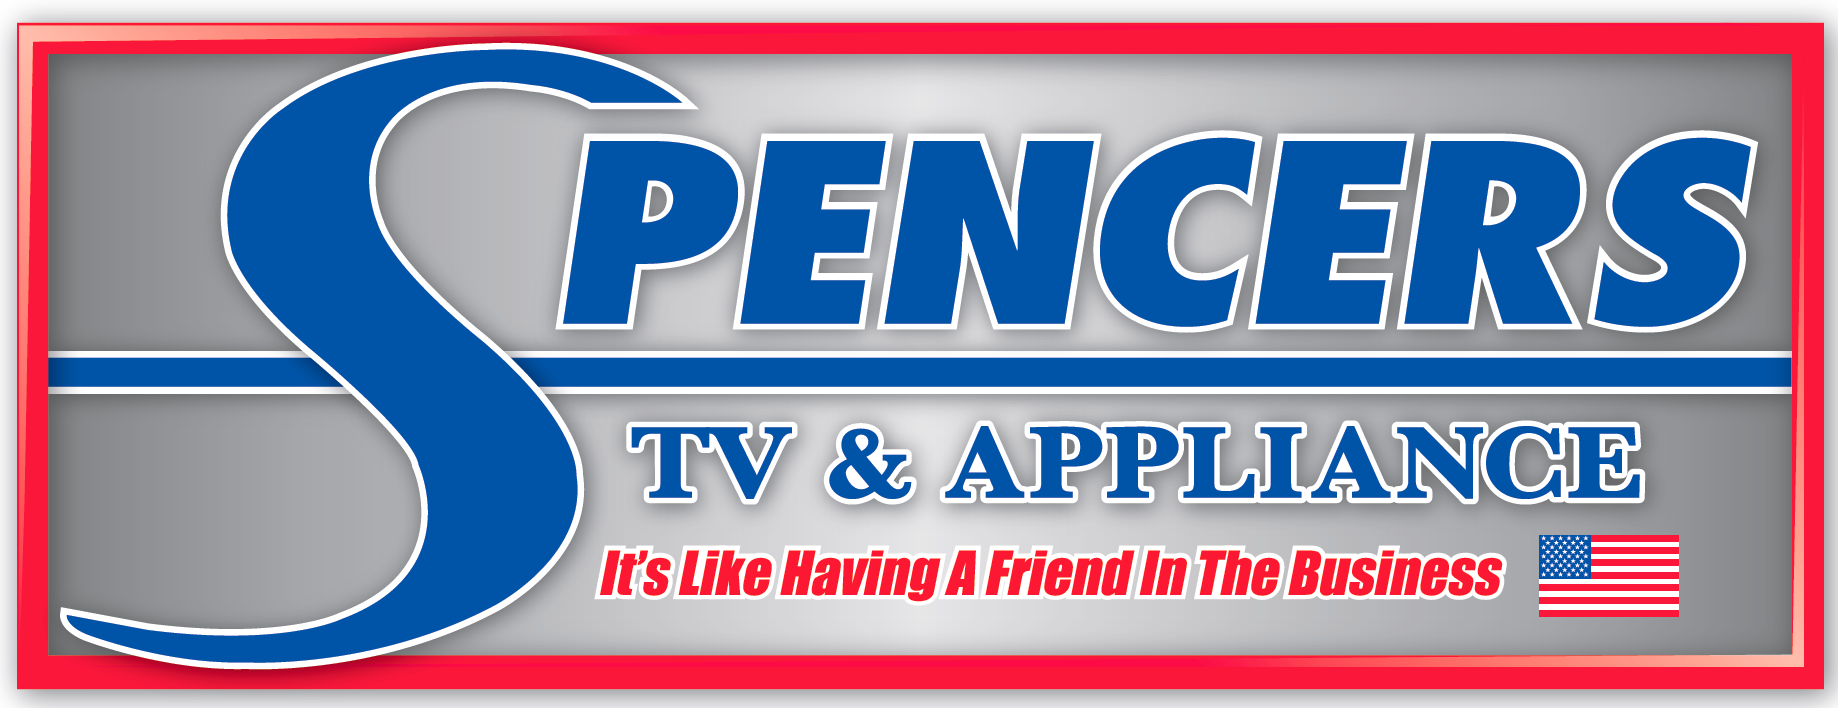 Spencer's Grocery & Fashion on the App Store